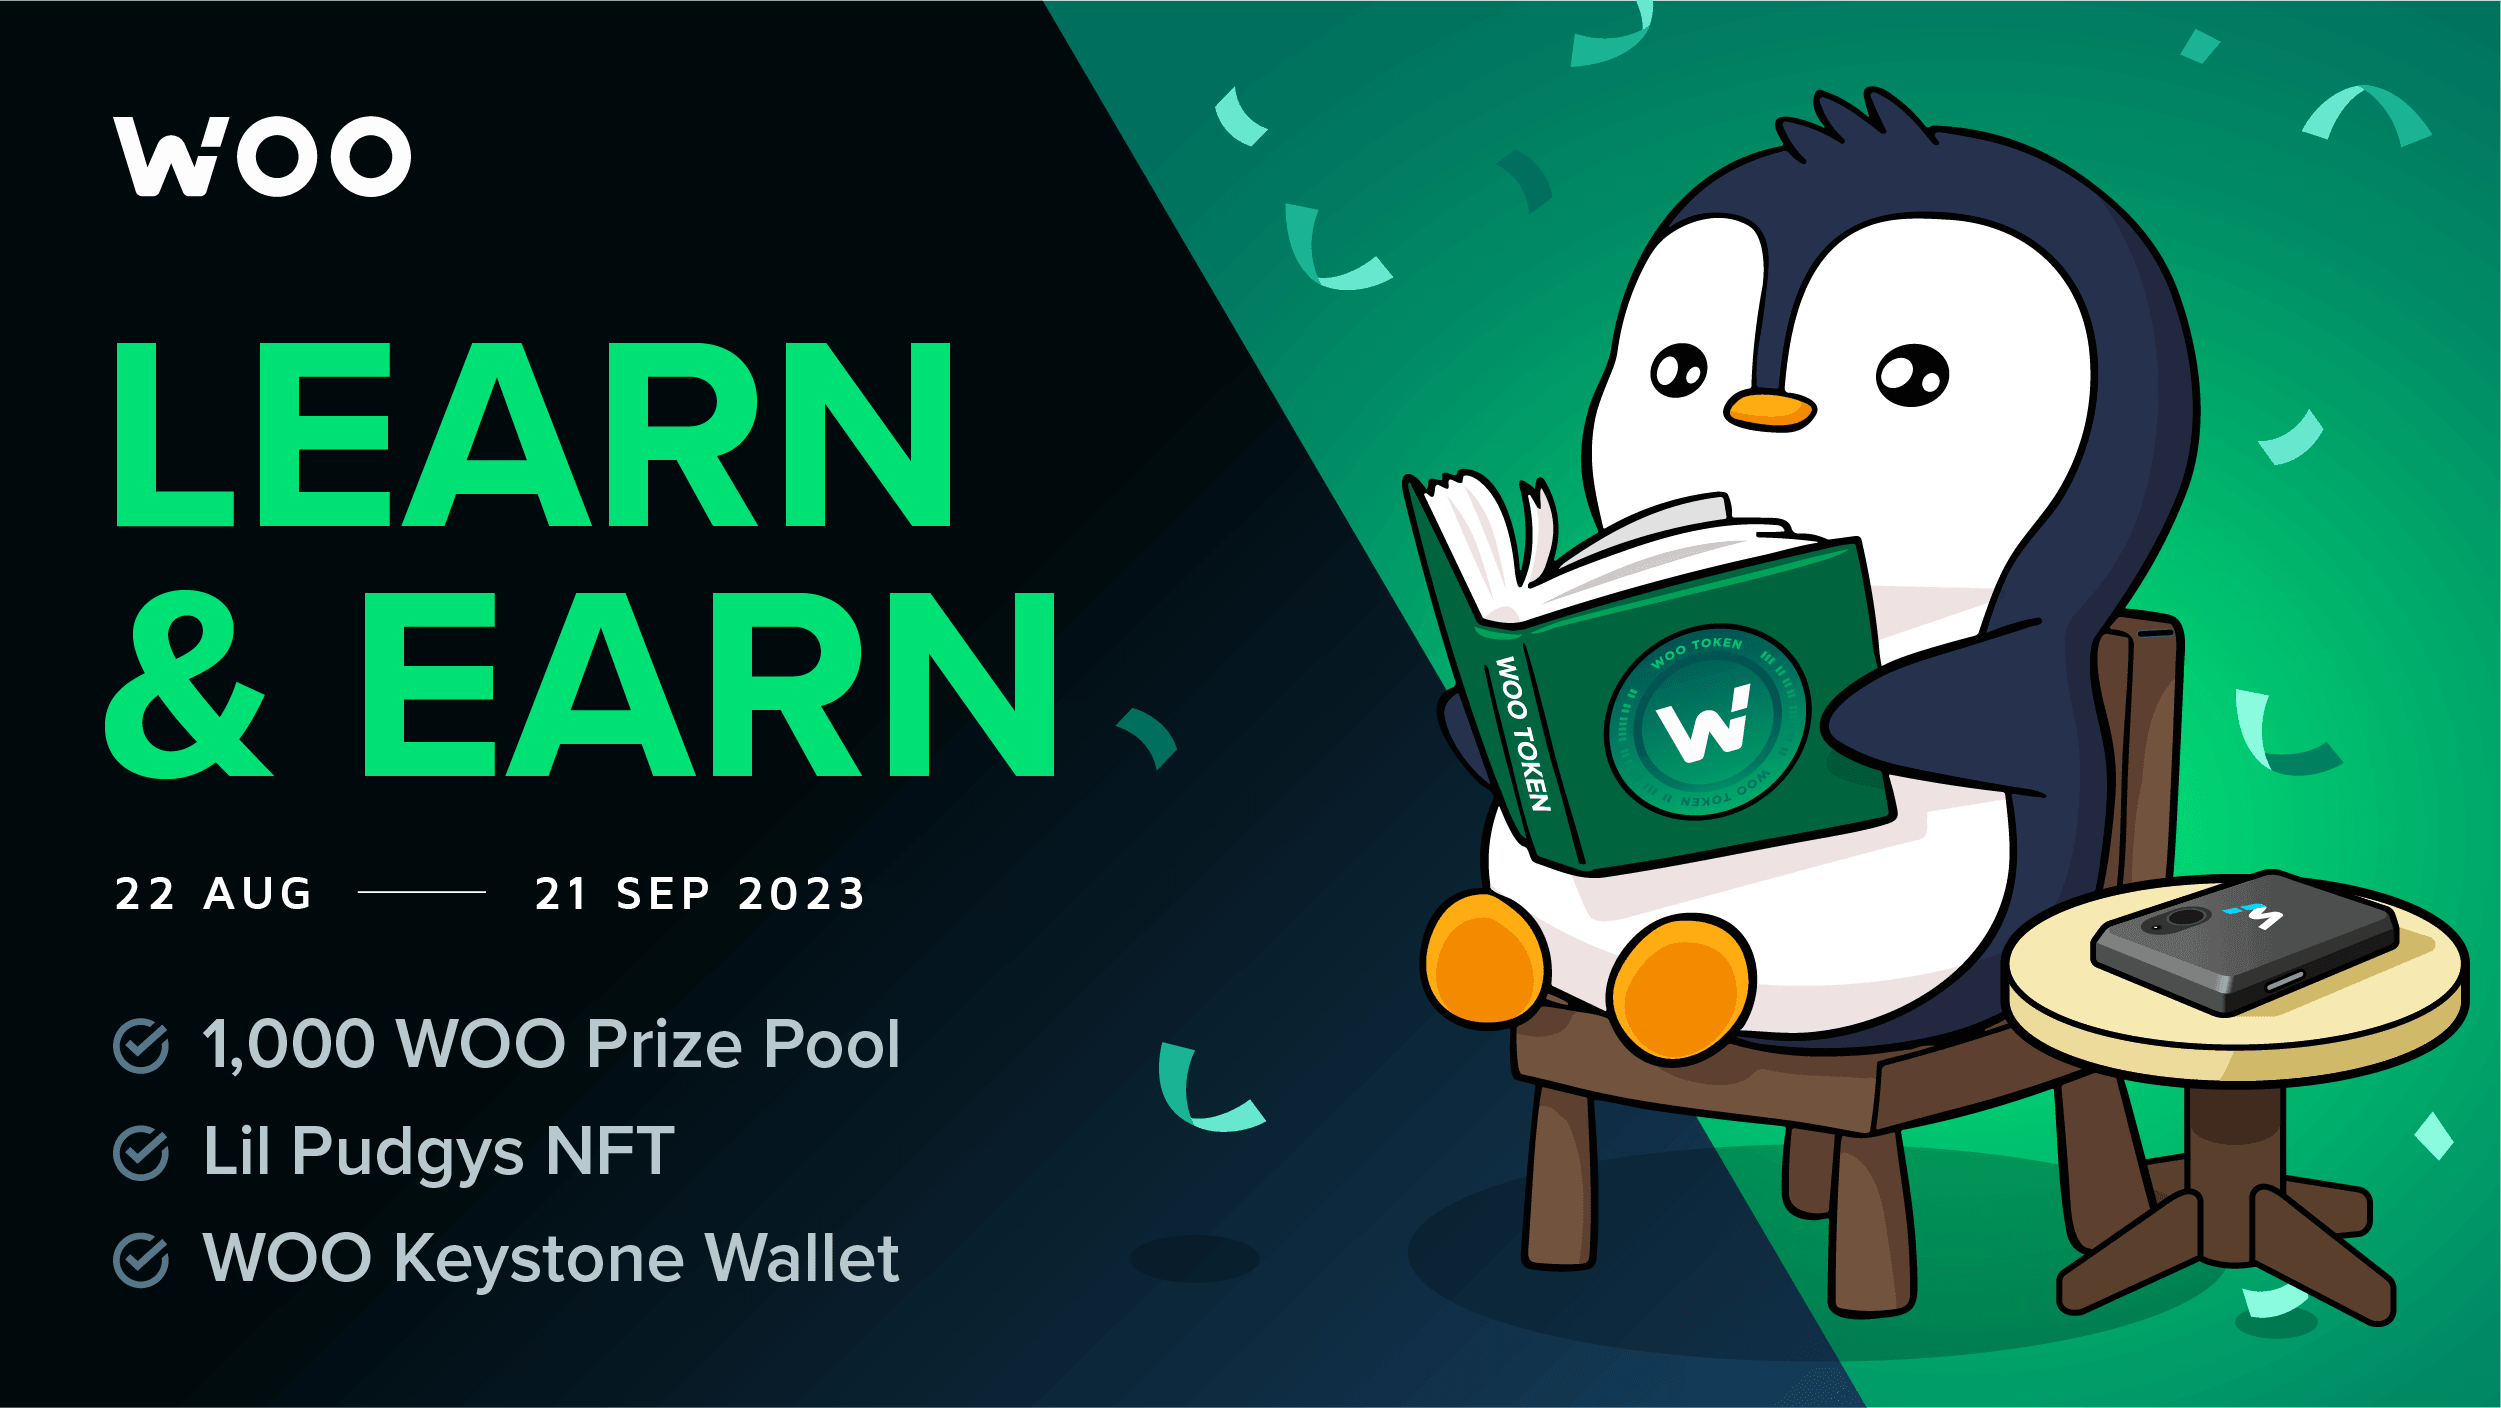 Learn what WOO is all about and win awesome prizes!